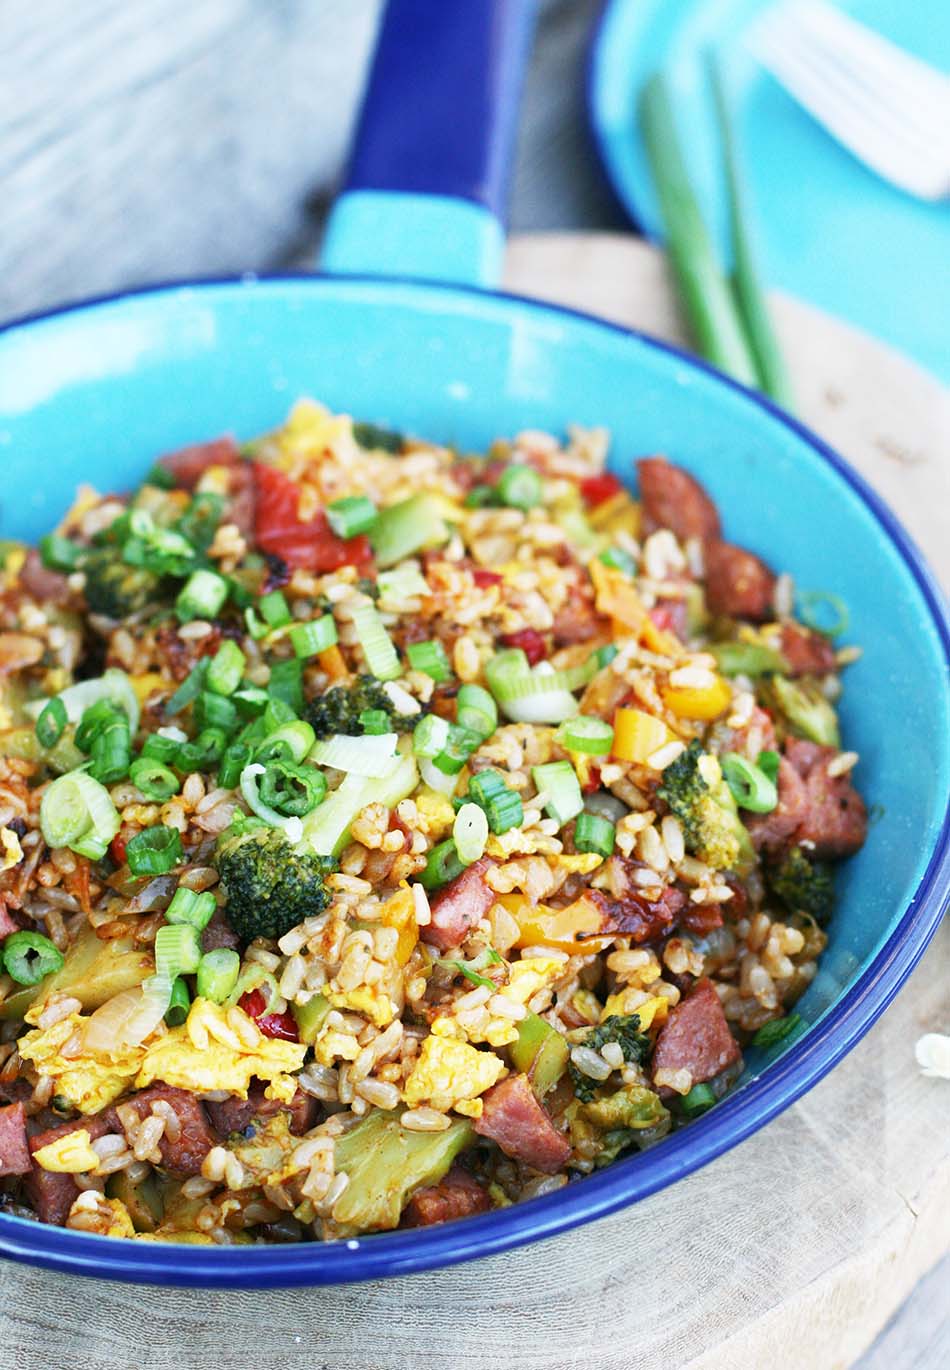 Kitchen sink fried rice, with veggies, meat, eggs, and other optional ingredients.